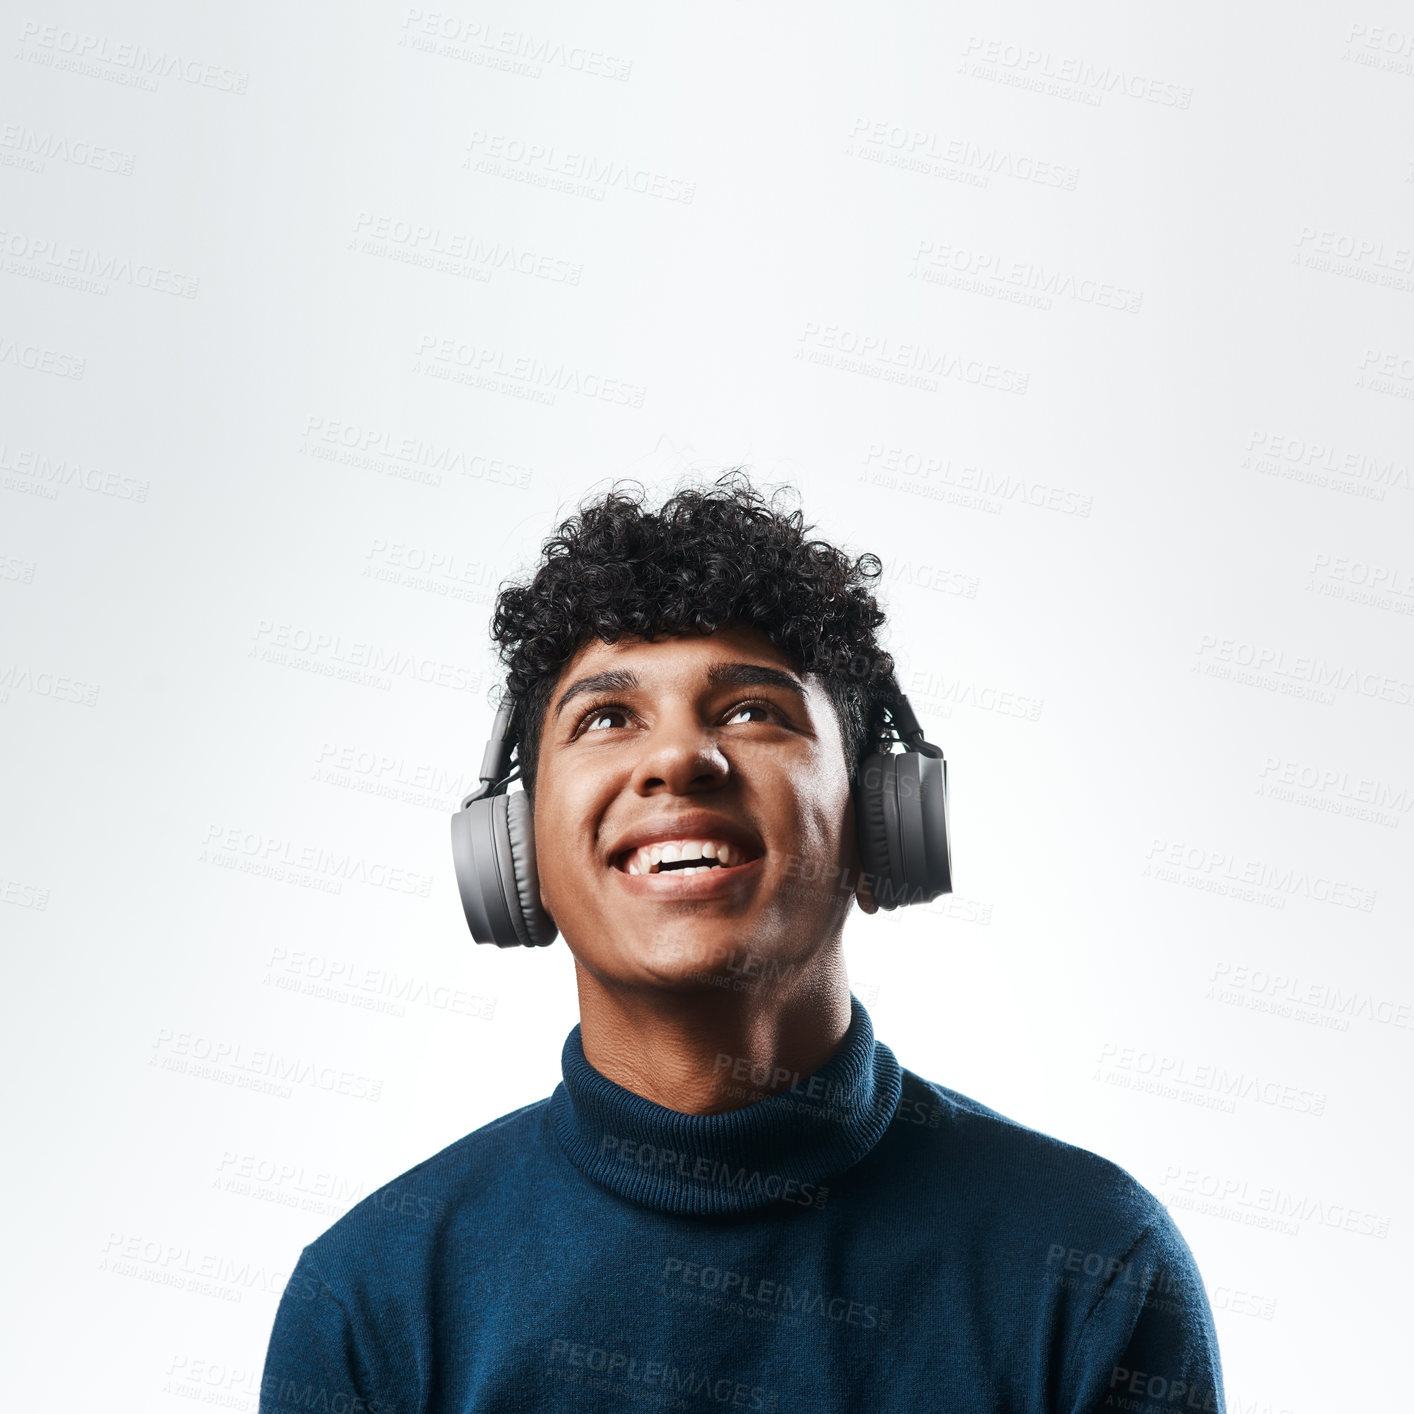 Buy stock photo Studio shot of a young man using headphones against a grey background